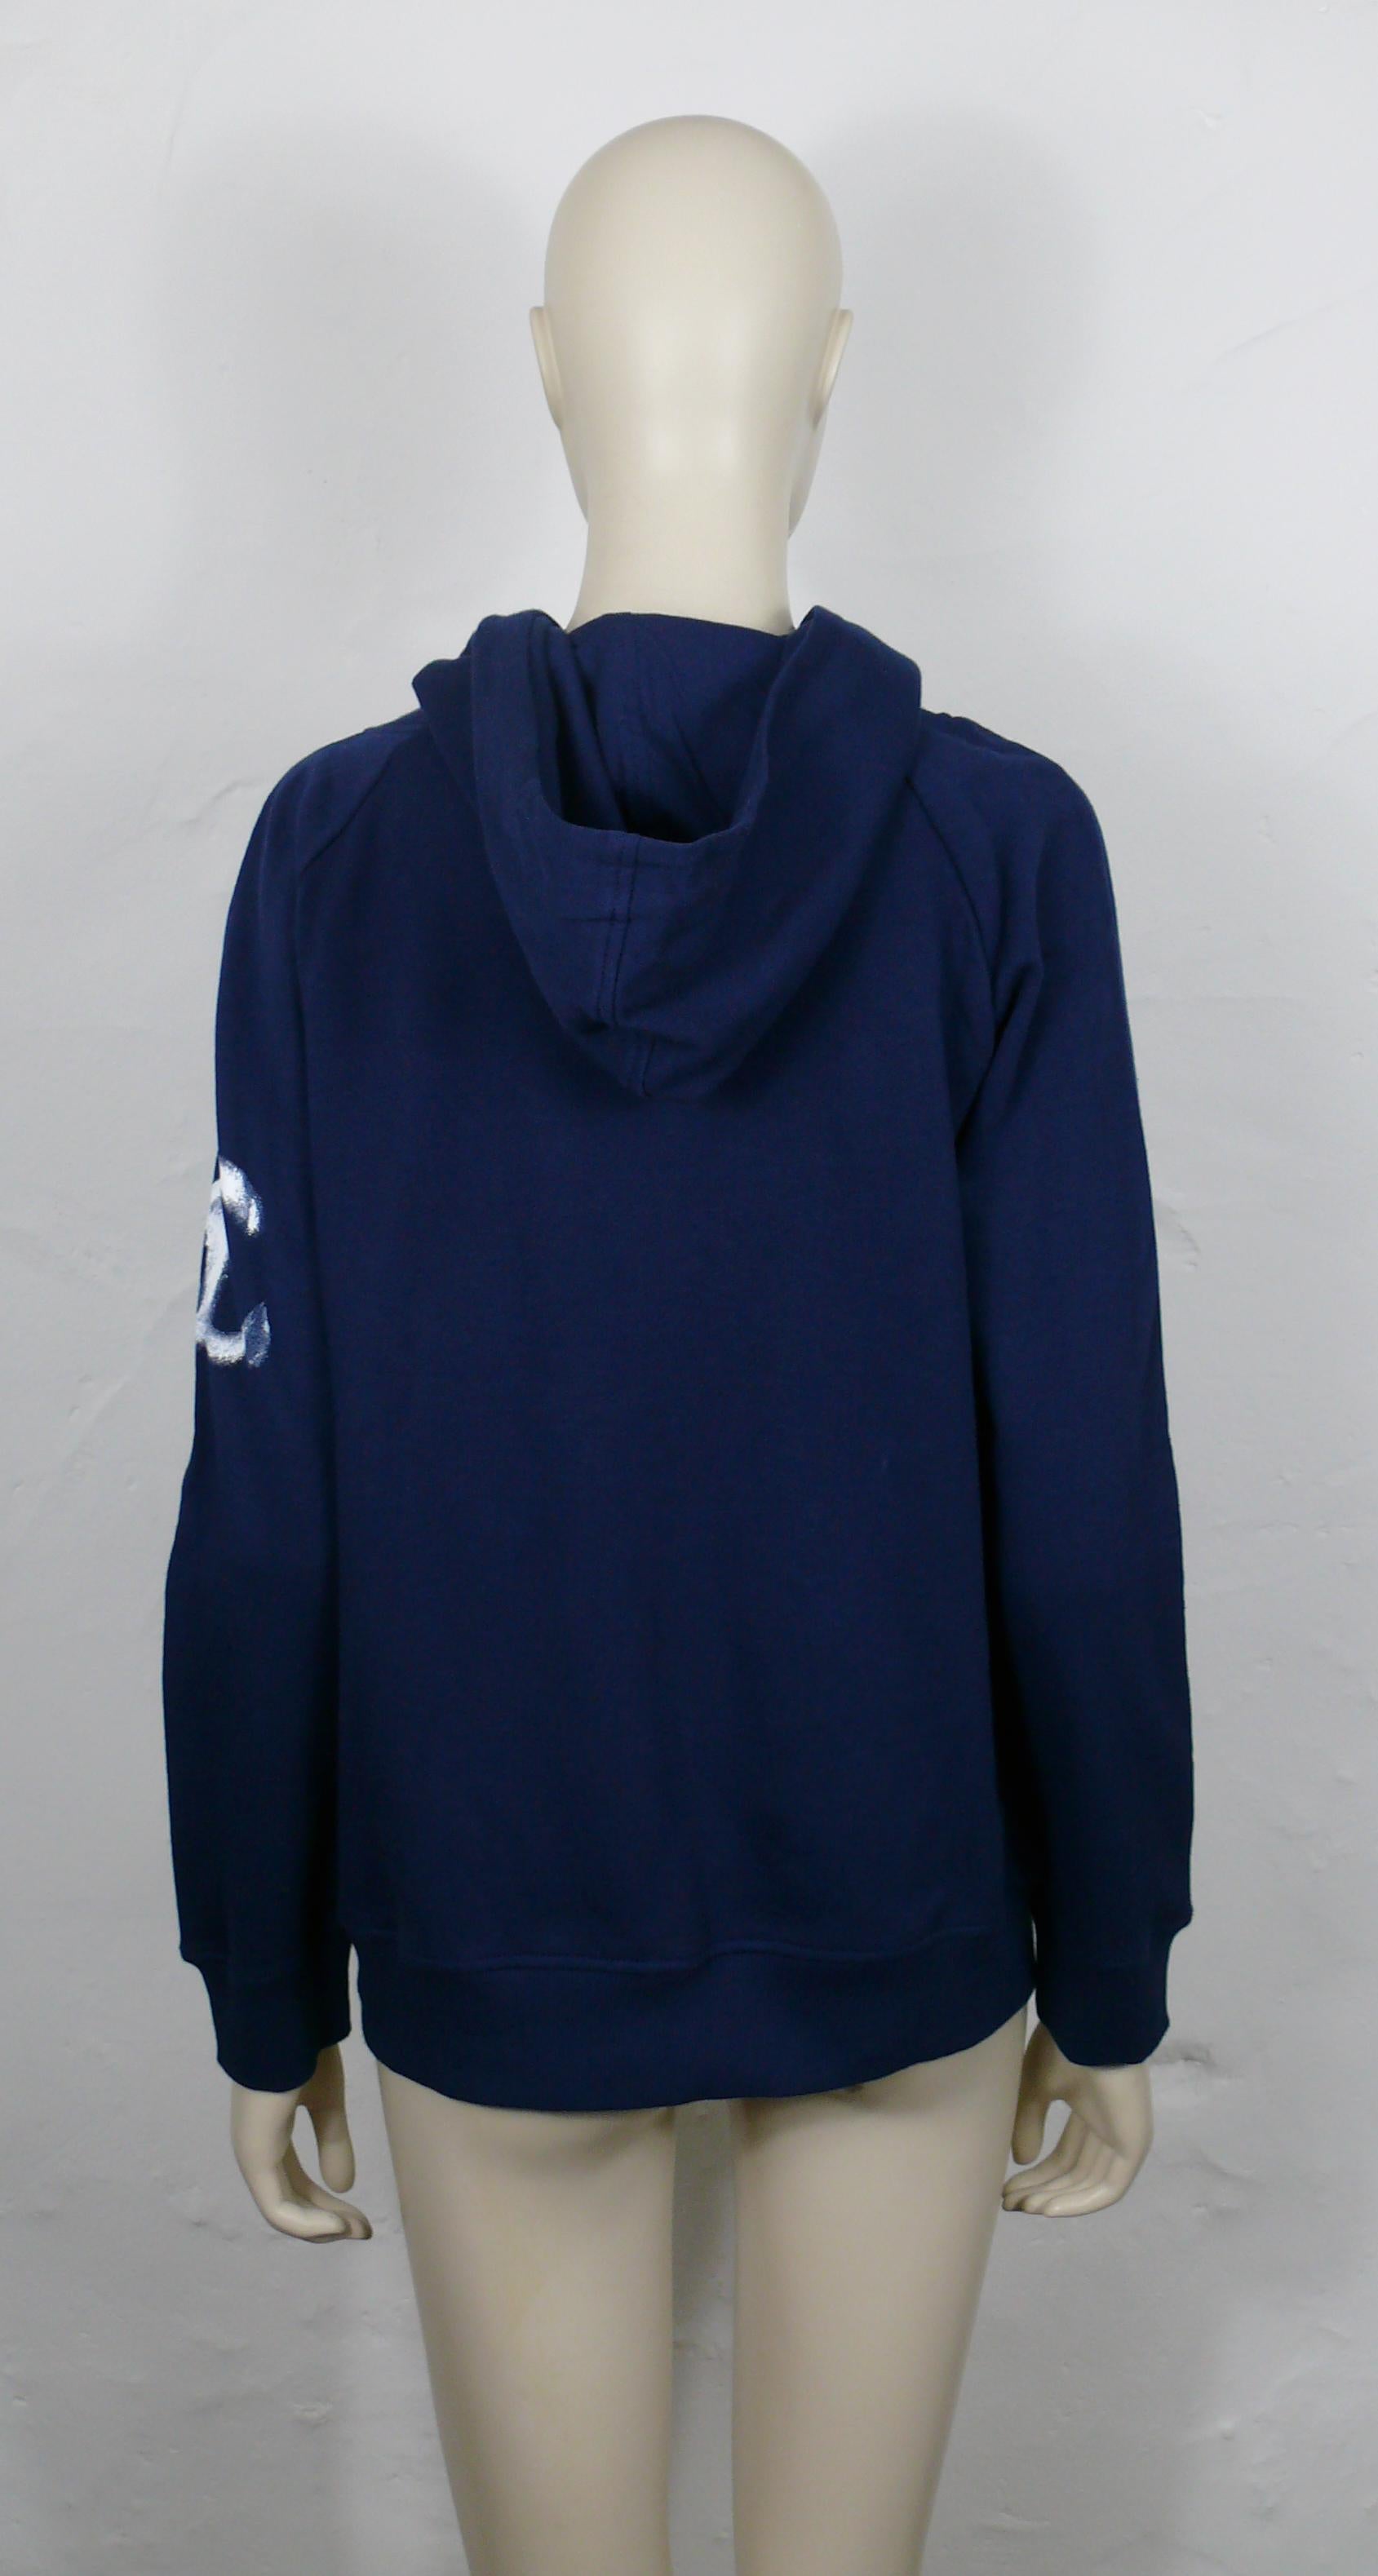 CHANEL Christmas 2013 VIPs Limited Edition Hooded Cotton Sweatshirt Size M For Sale 5